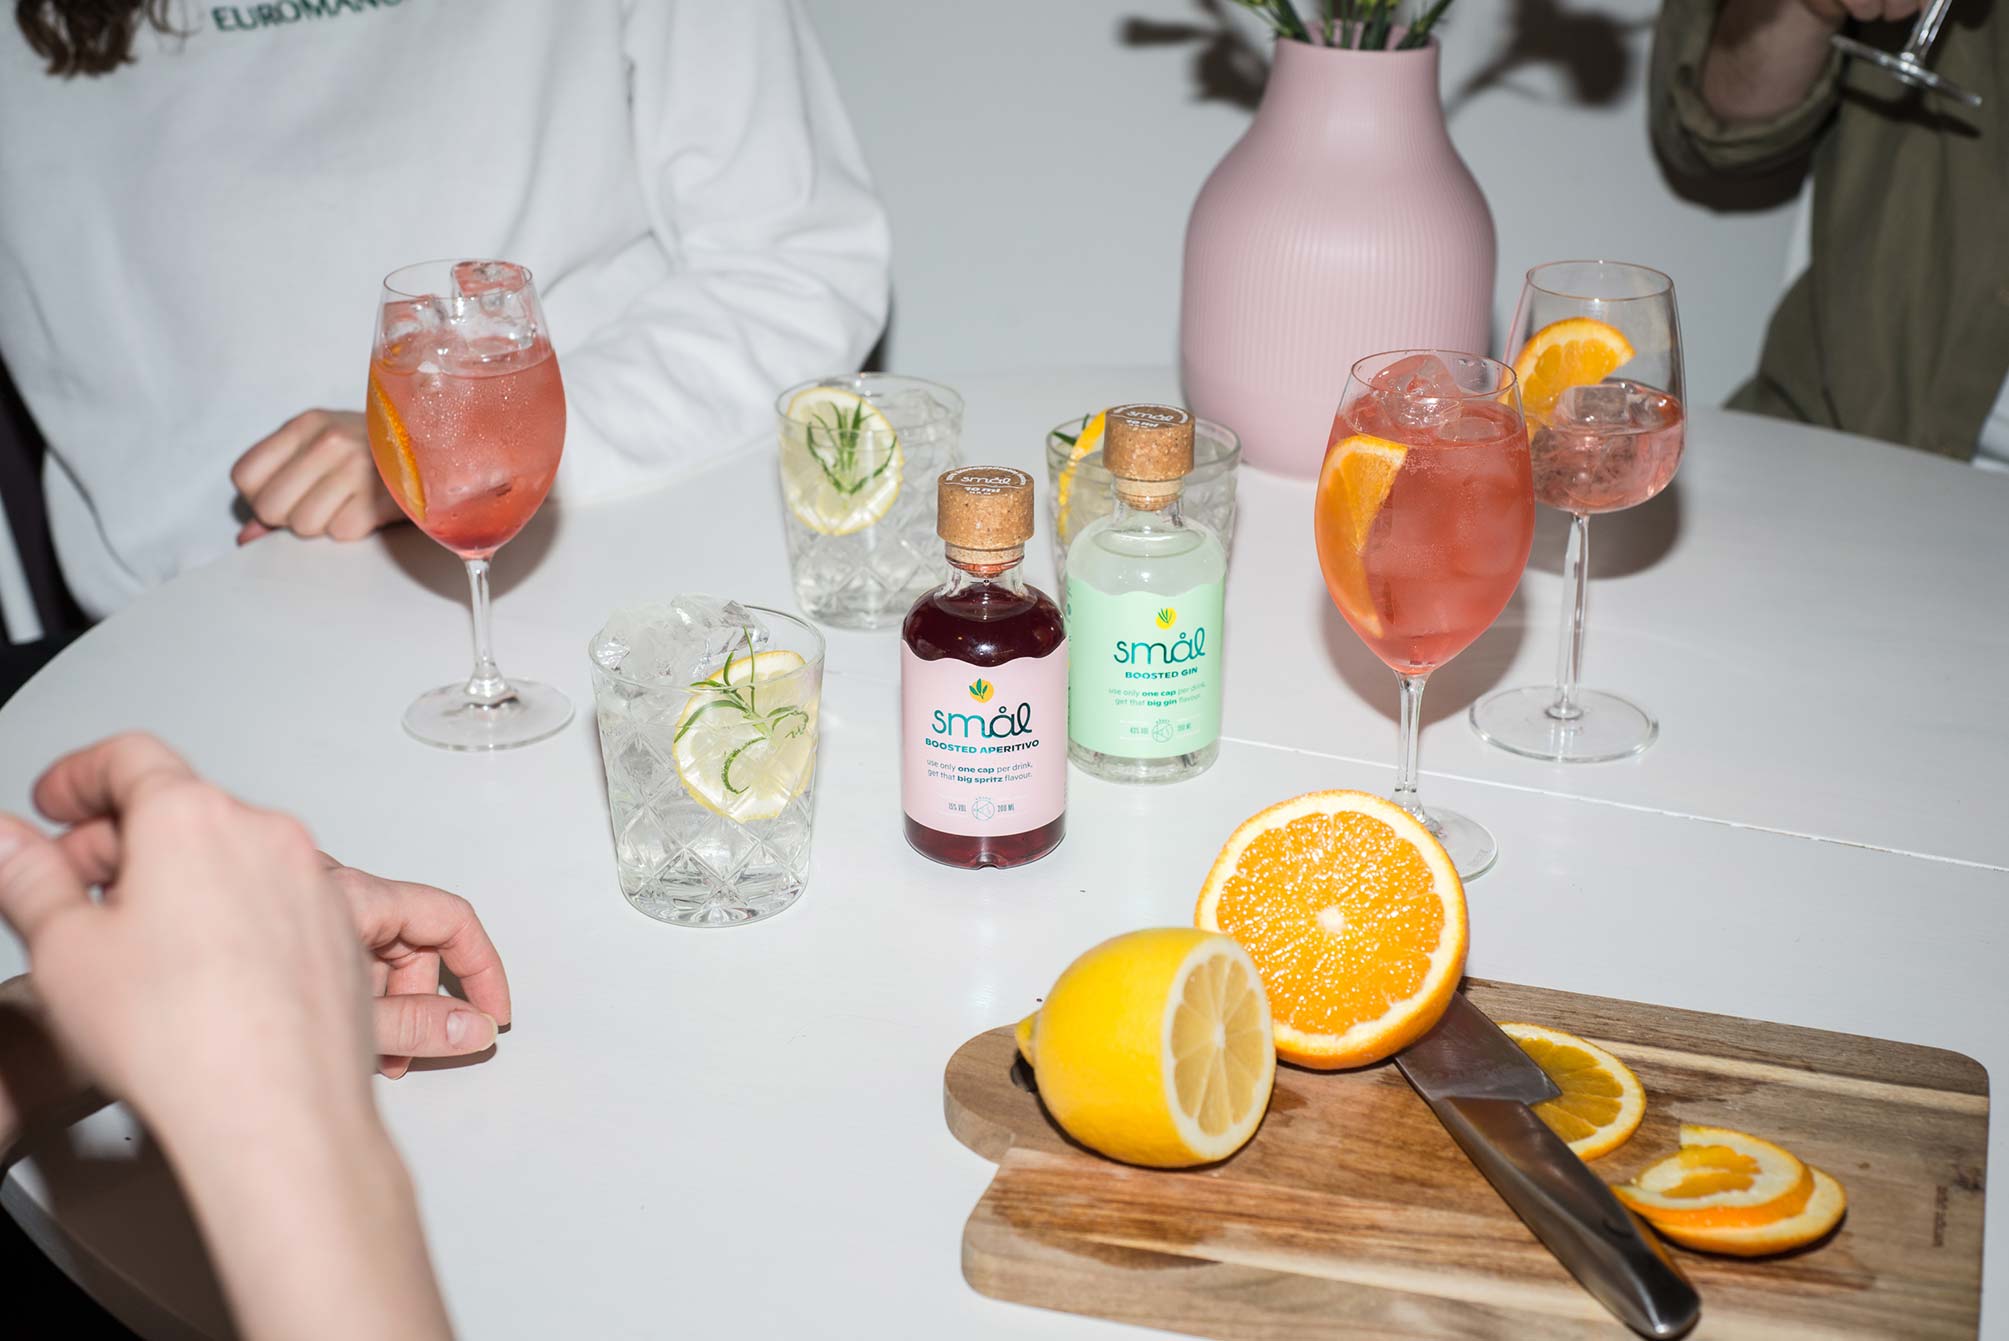 A unique T-top bottle closure made of Sulapac material helps Kåska’s customers perfect their low alcohol cocktails